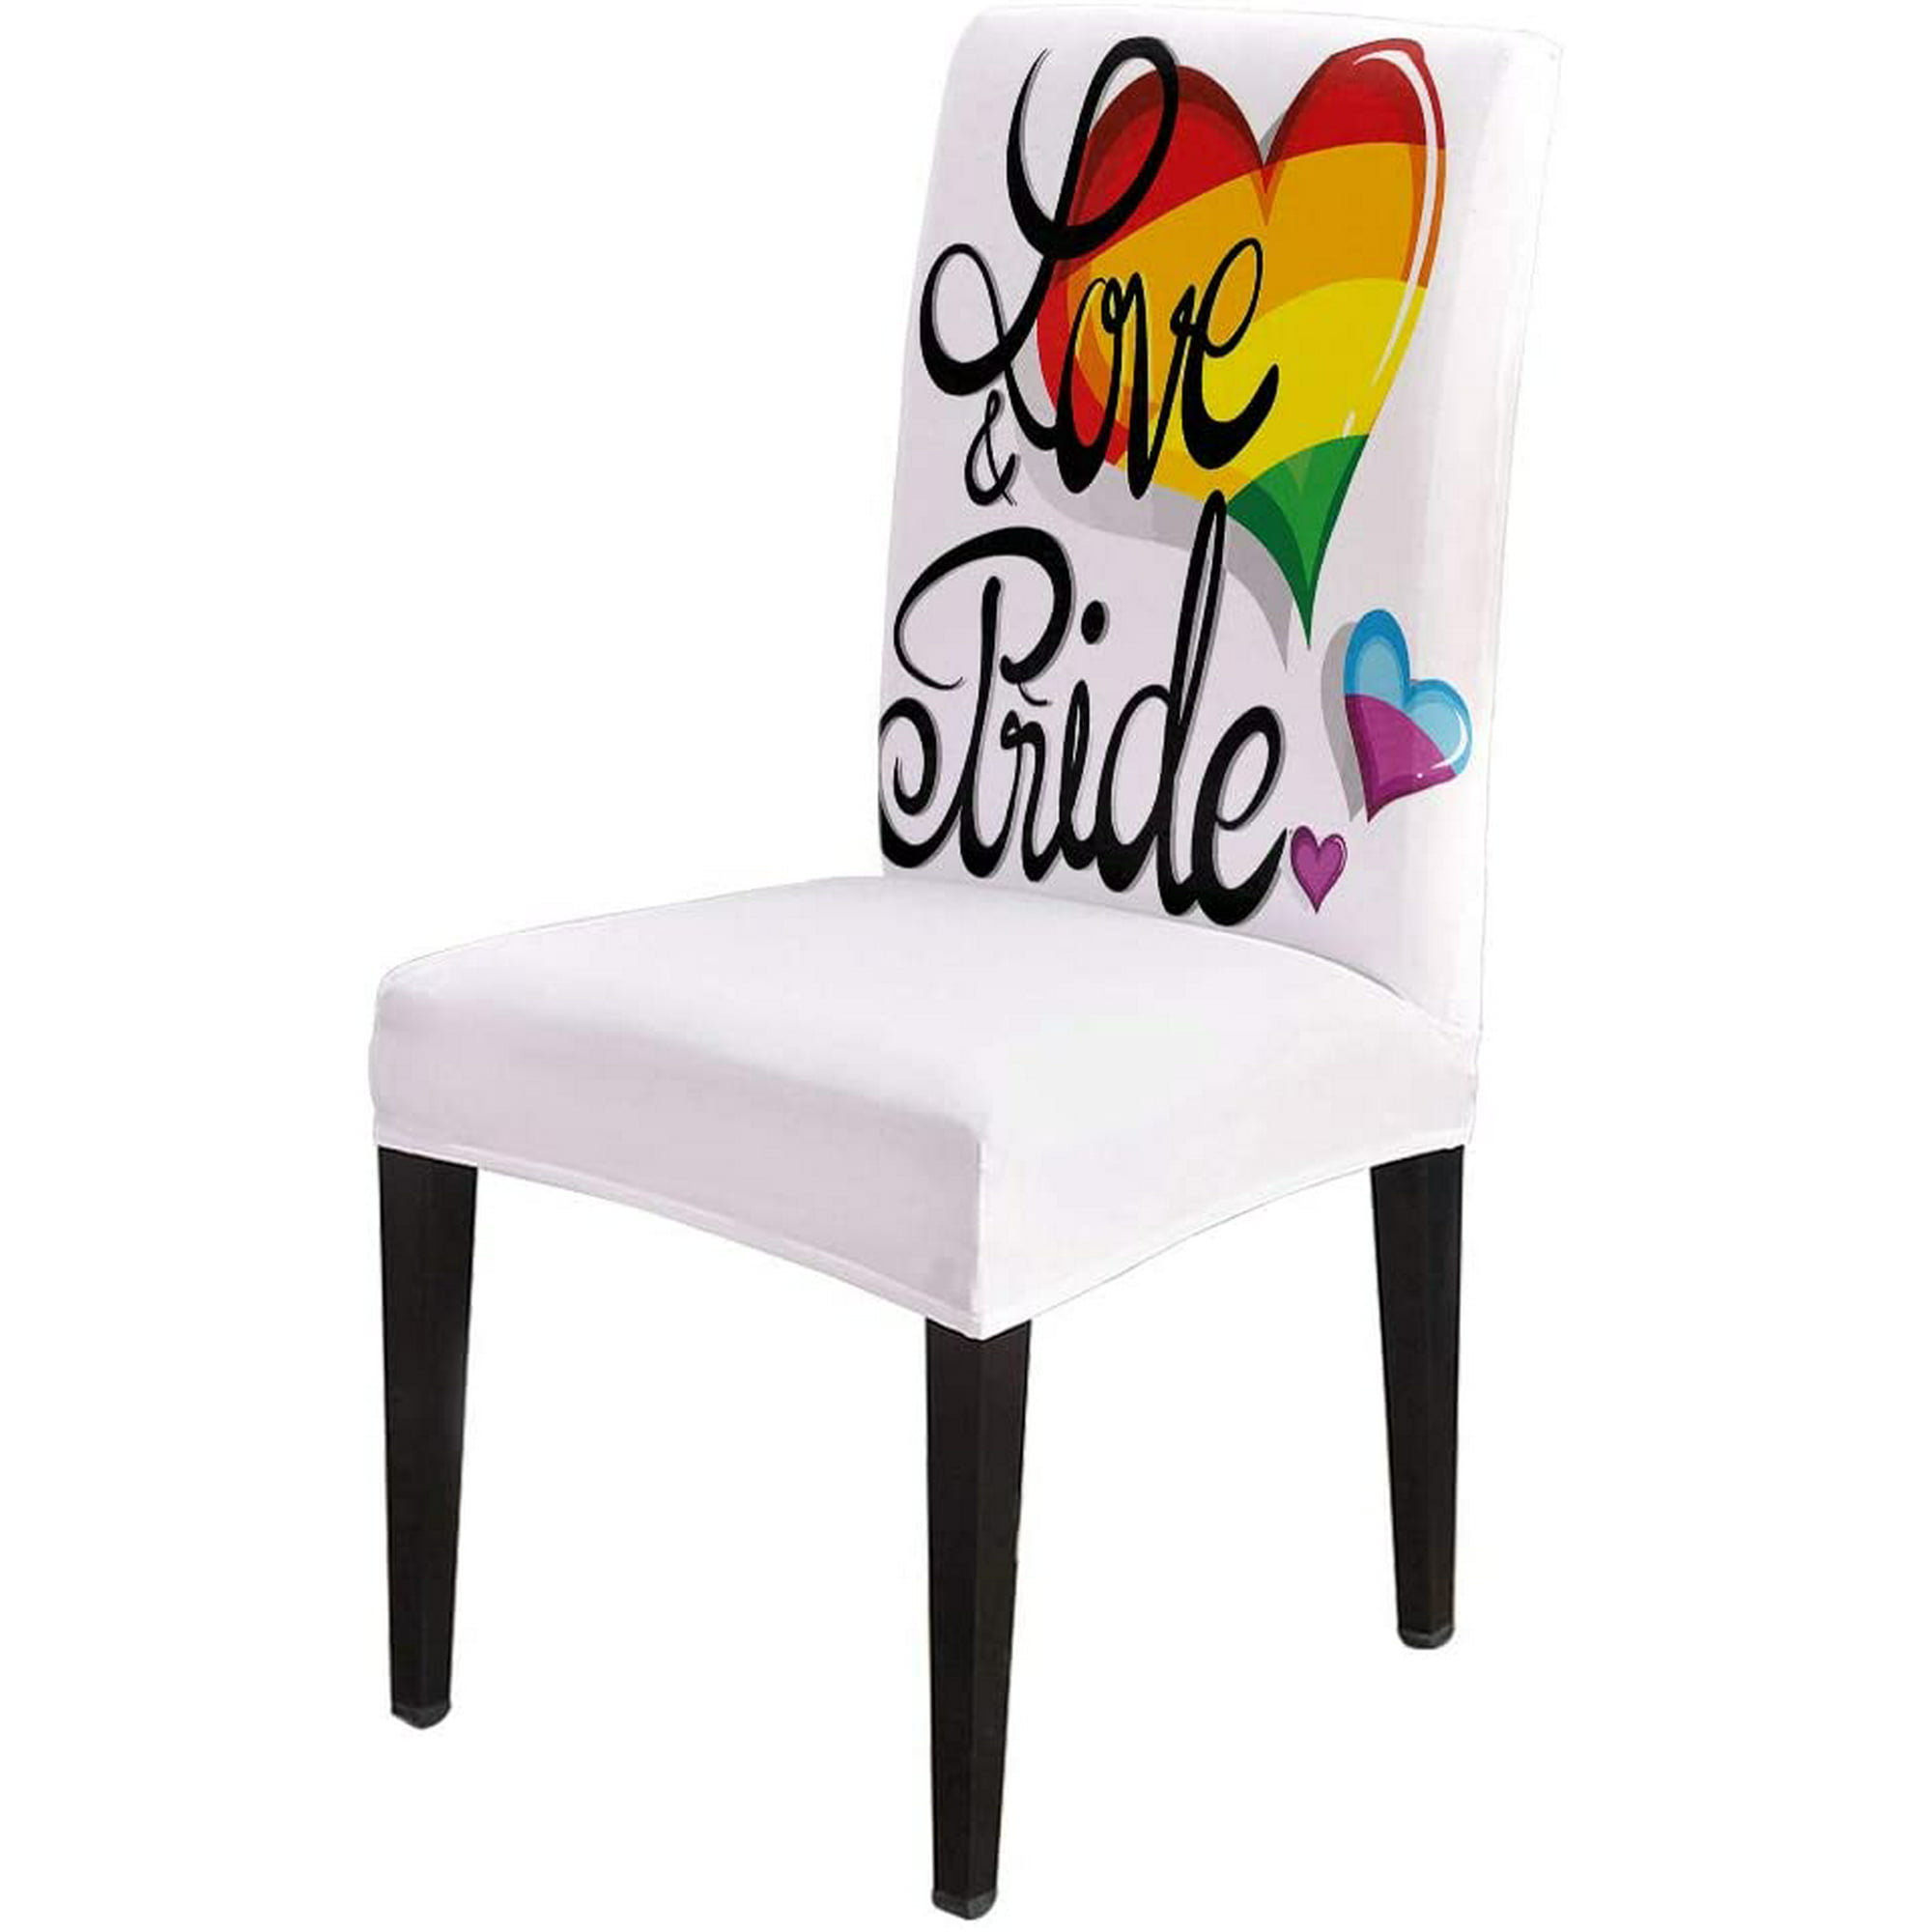 Valentines Dining Chair Covers Heart Shape Seat Protector Slipcovers 6pcs Rainbow Stretch For Banquet Wedding Party Canada - How To Shape A Chair Seat